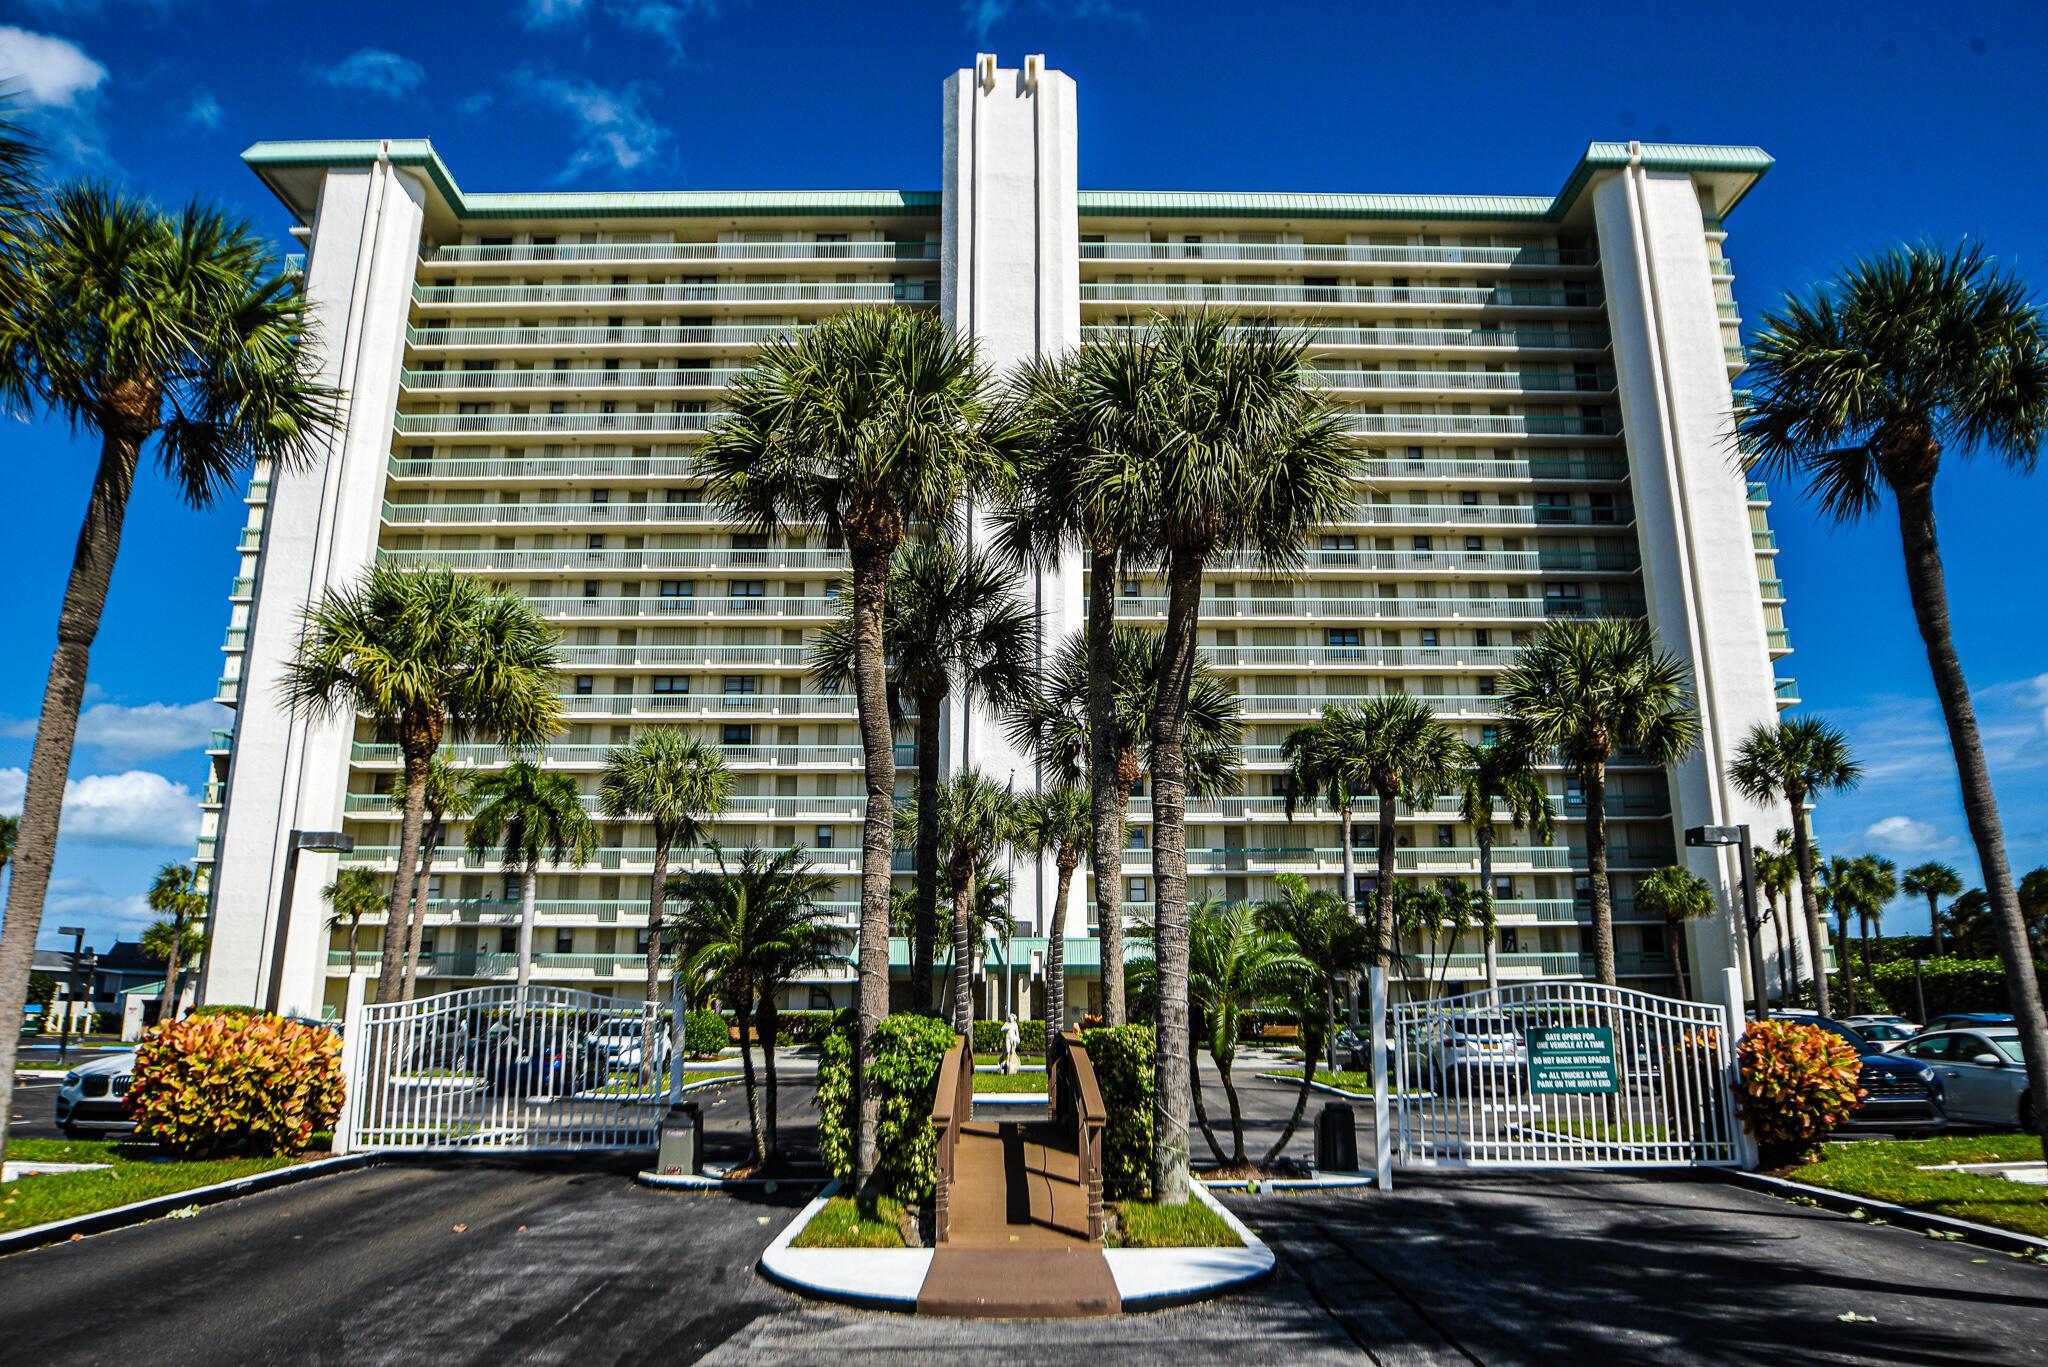 Current Special Assessments paid by seller!  12th floor on the ocean in Oceana II North! This fully furnished two bedroom unit has 2 remodeled bath rooms; balcony access from living and master bedroom; pocket door encloses a guest suite; newer 18'' diagonal tile in living area, lots of storage; Only able to stay 6 months a year? Recoup some owning costs with 90 day minimum rentals; washer and dryer in unit; amenities for Oceana include 2 pools (1 heated), recreation room, gym, manager on site, outdoor storage yard for your boat, RV, trailer is included for residents; tennis and pickle ball courts, cable, internet,  SPECIAL FINANCING OFFER. Below market fixed rate & $1500.00 credit towards buyers costs when using preferred, LOCAL, DIRECT LENDER